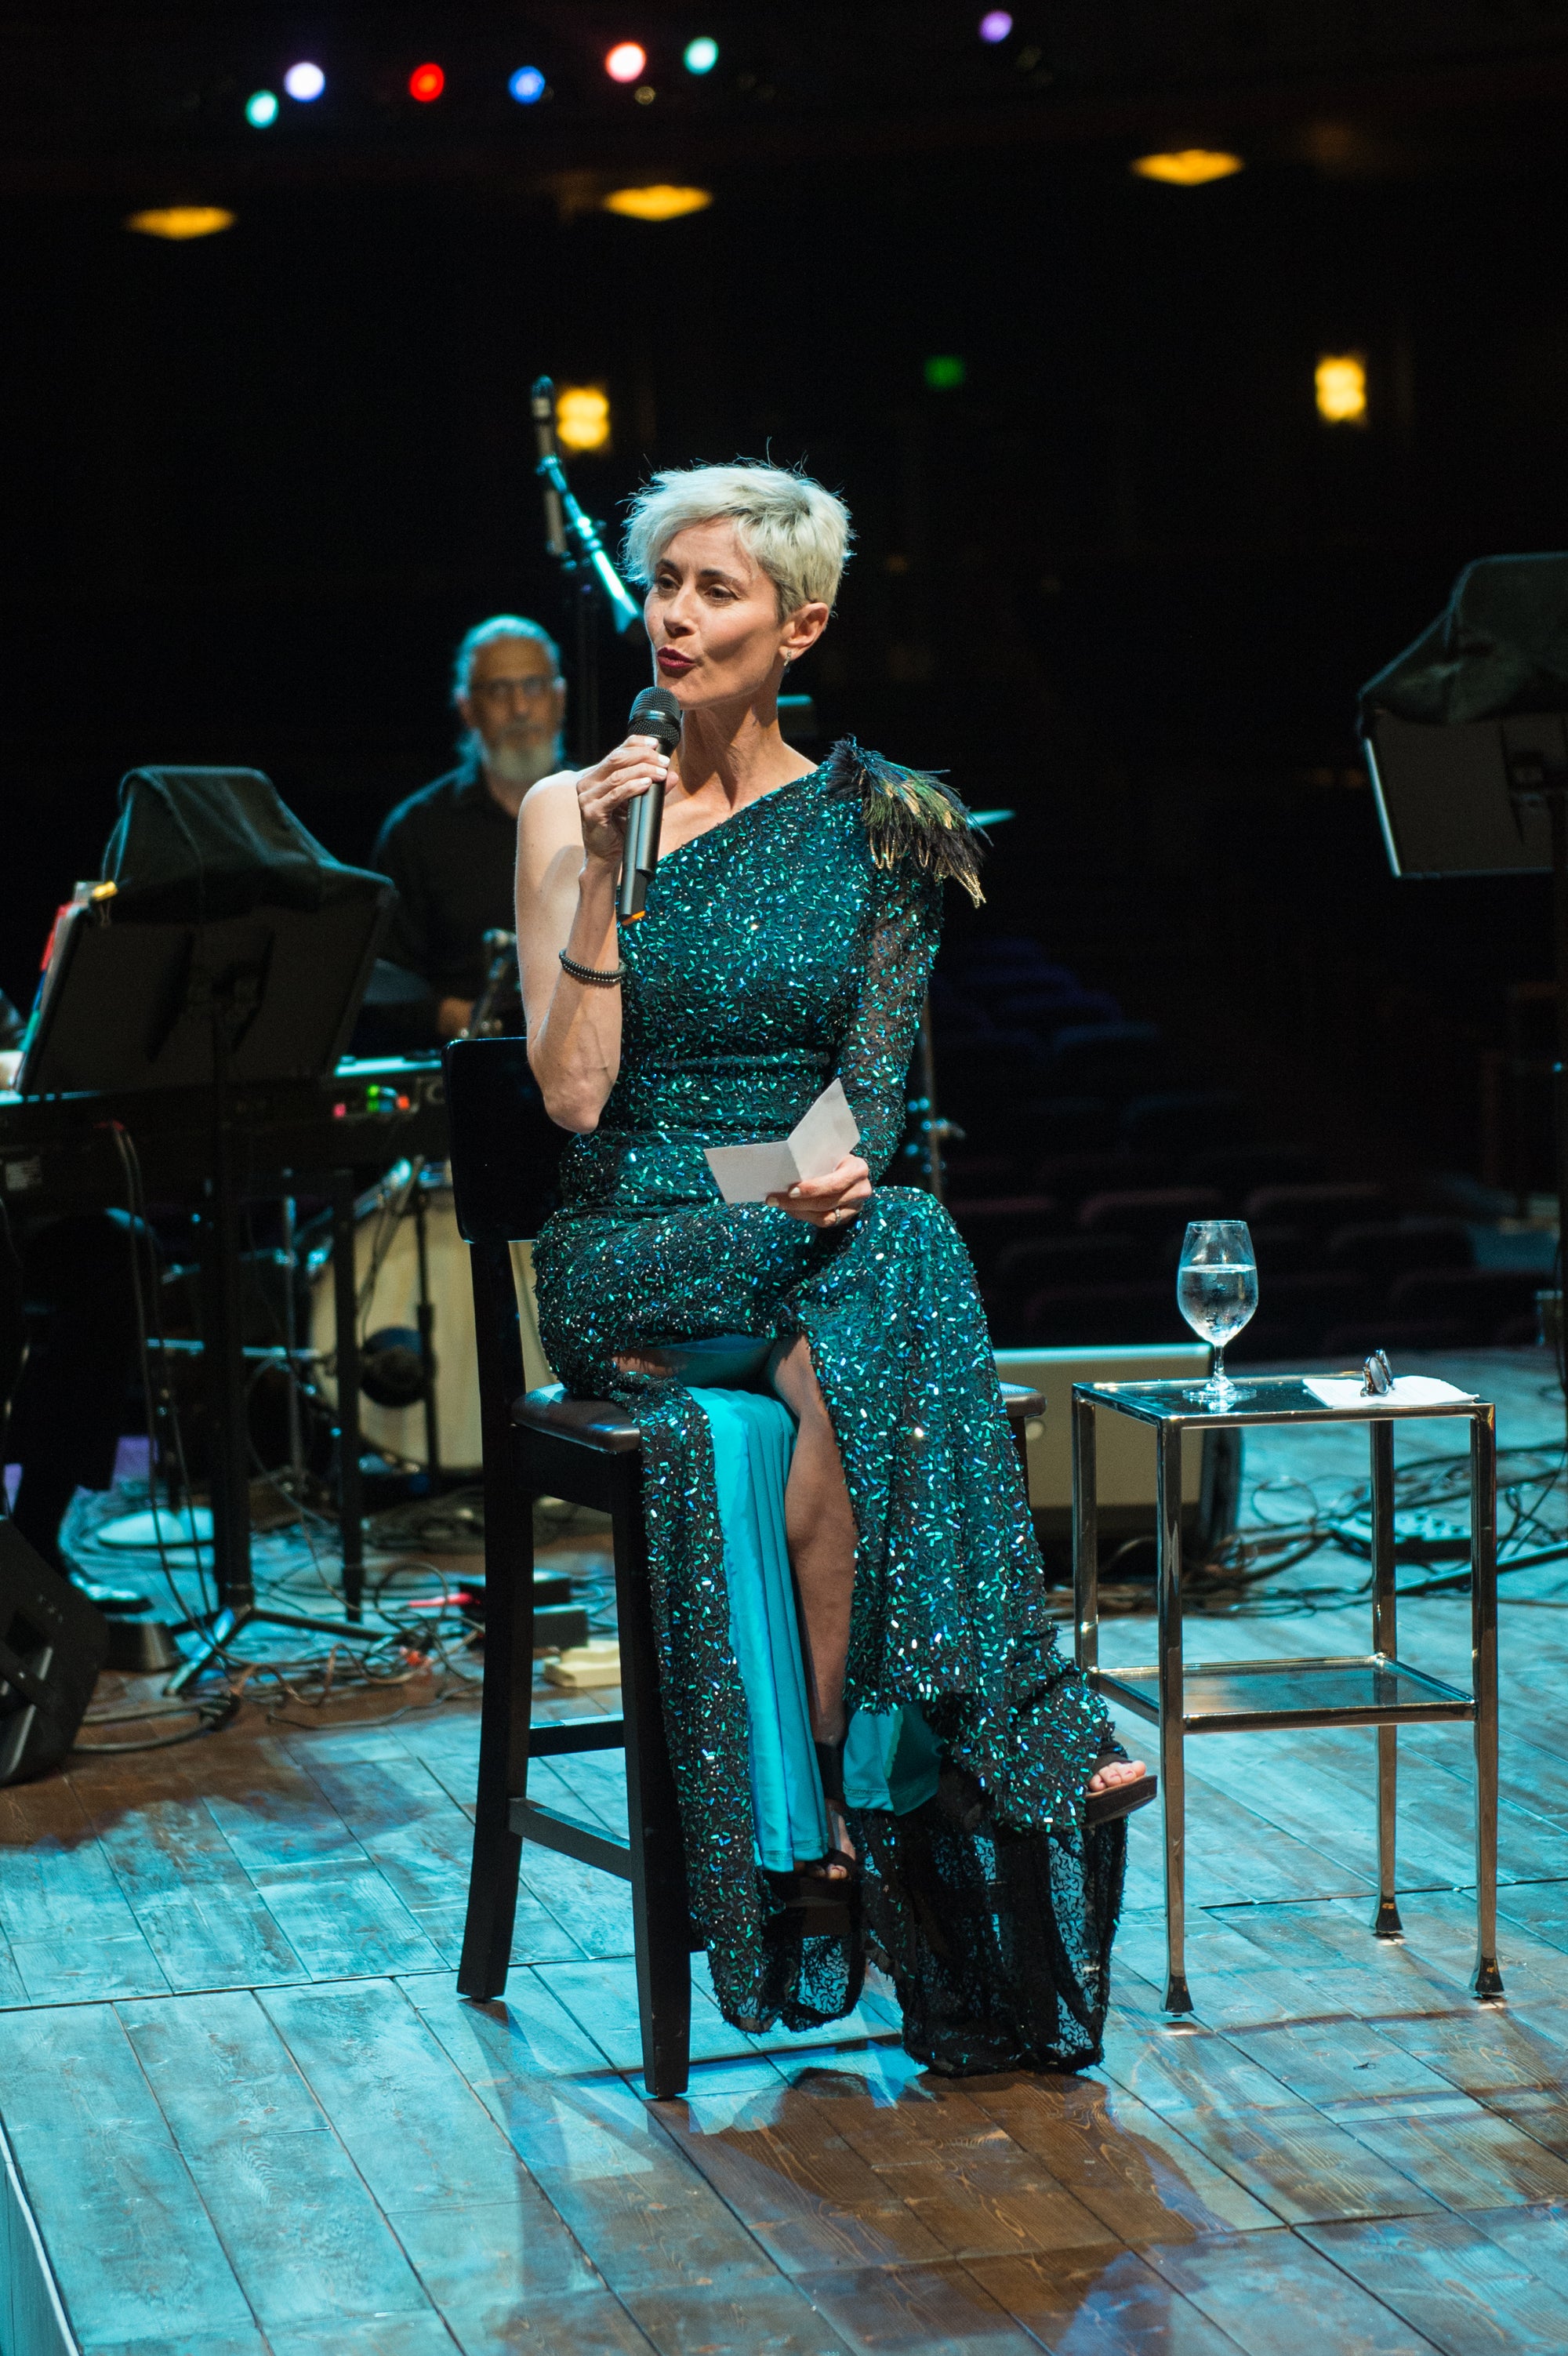 Beth Malone, a Tony Award Nominee, wearing a custom one shoulder and sequin gown by David Peck sitting down and singing at a venue.